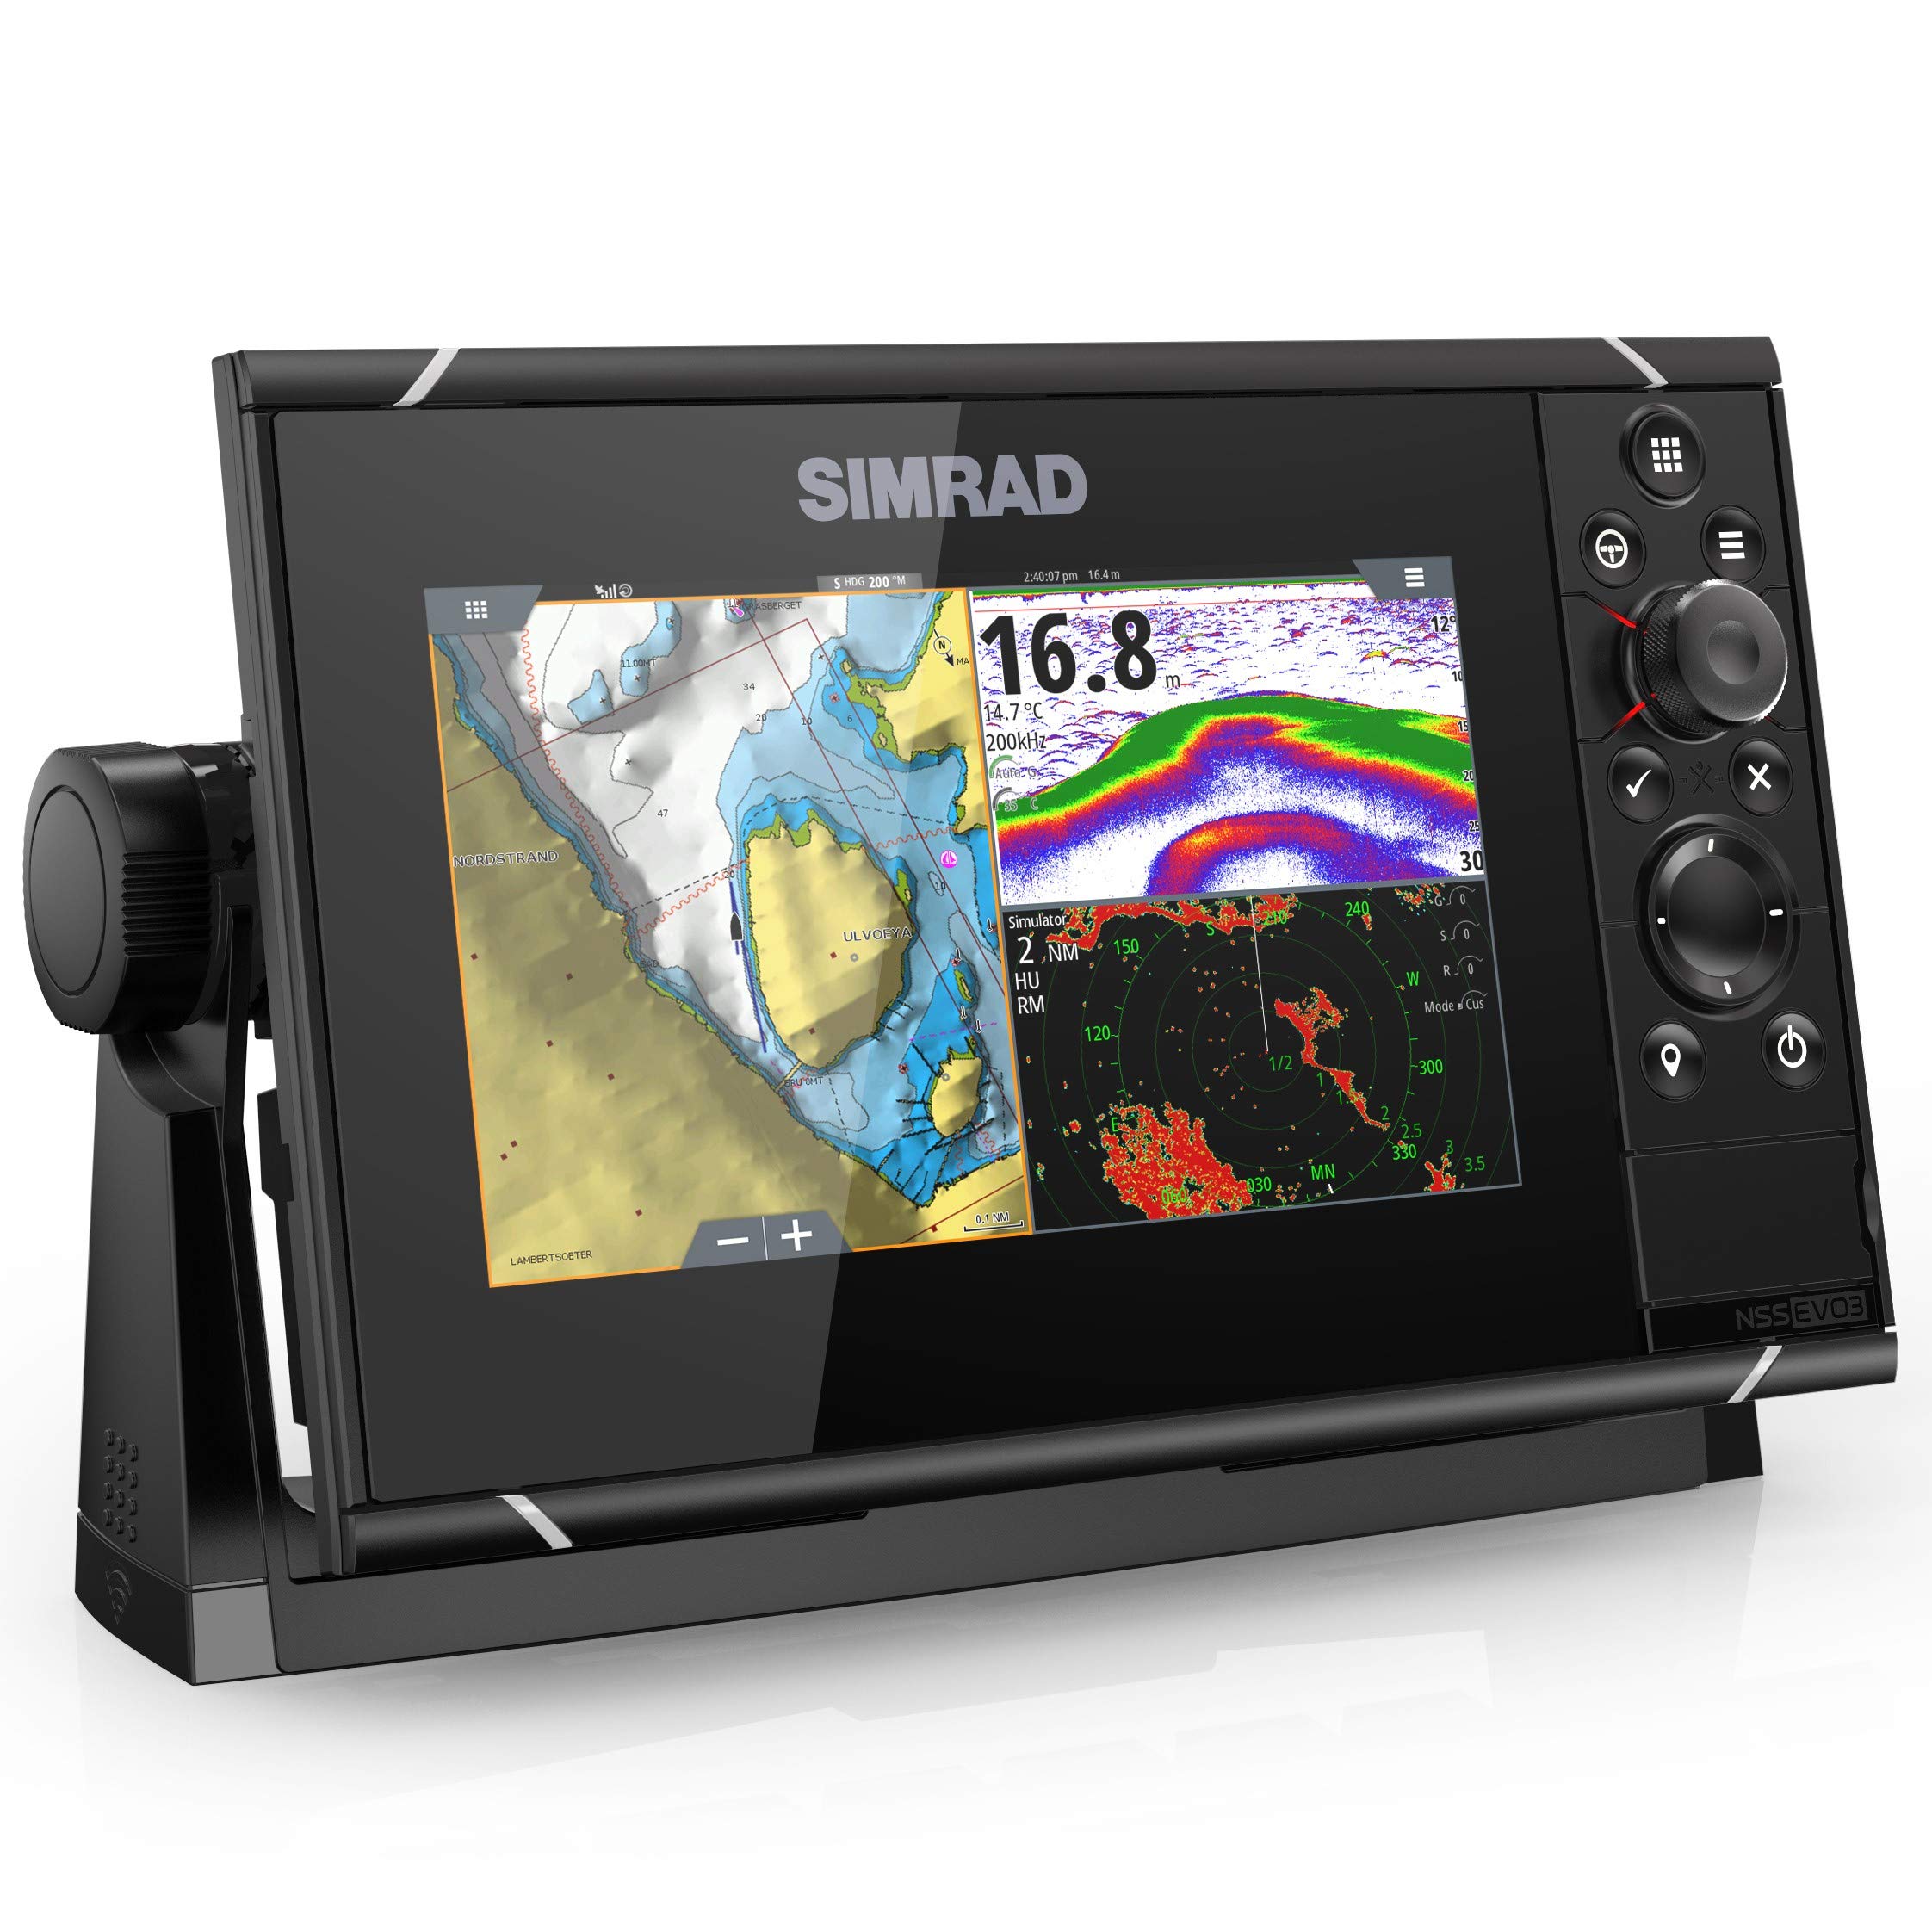 Simrad NSS evo3: 7-inch Navigation Display with GPS, SolarMAX Display and C-MAP Insight Pro Charts Installed.